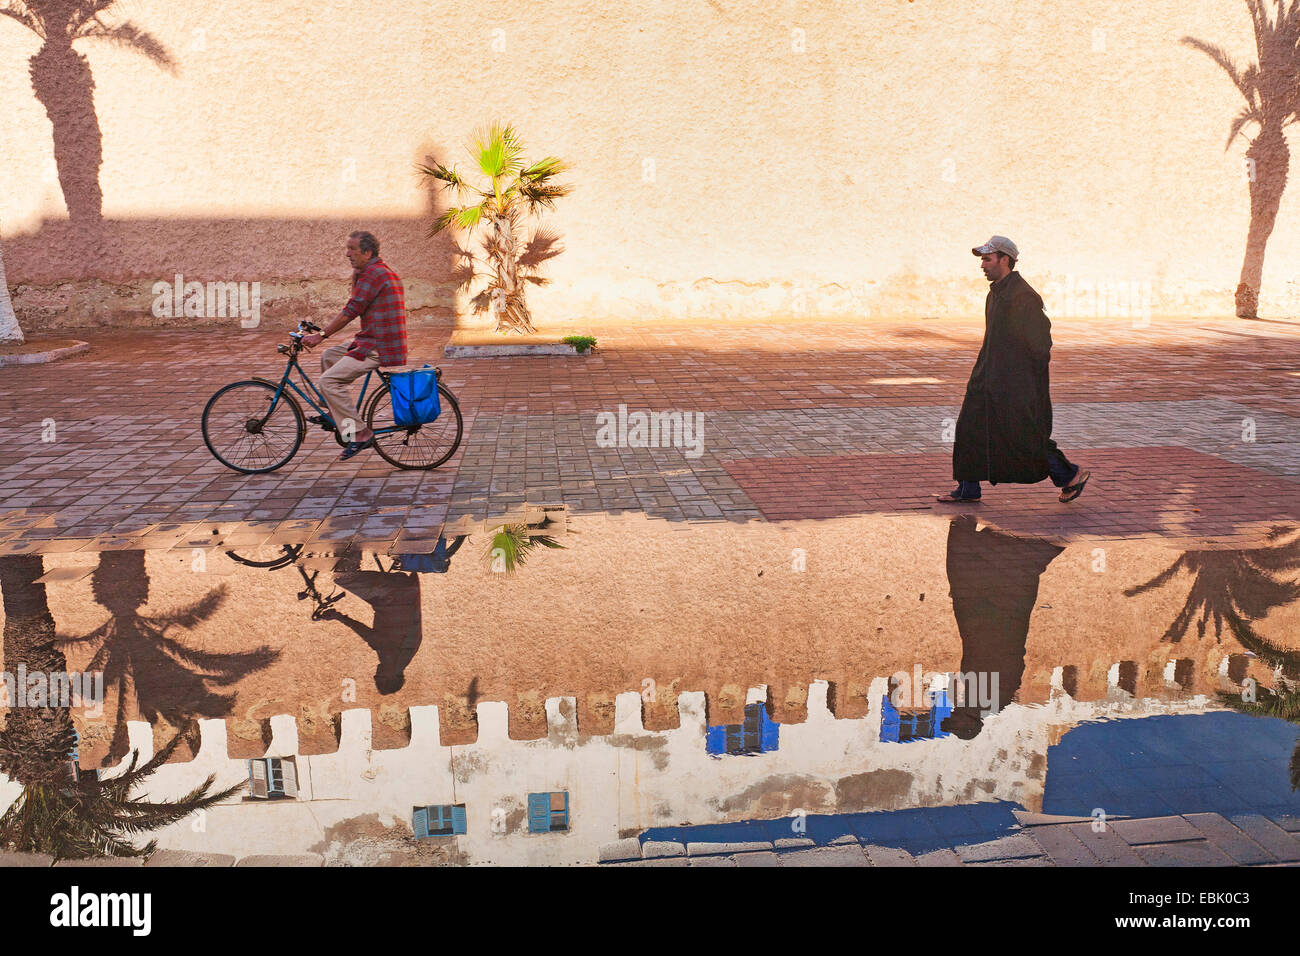 biker, pedestrian an historical town wall reflecting in puddle of water after a ain shower, Morocco, Essaouira Stock Photo